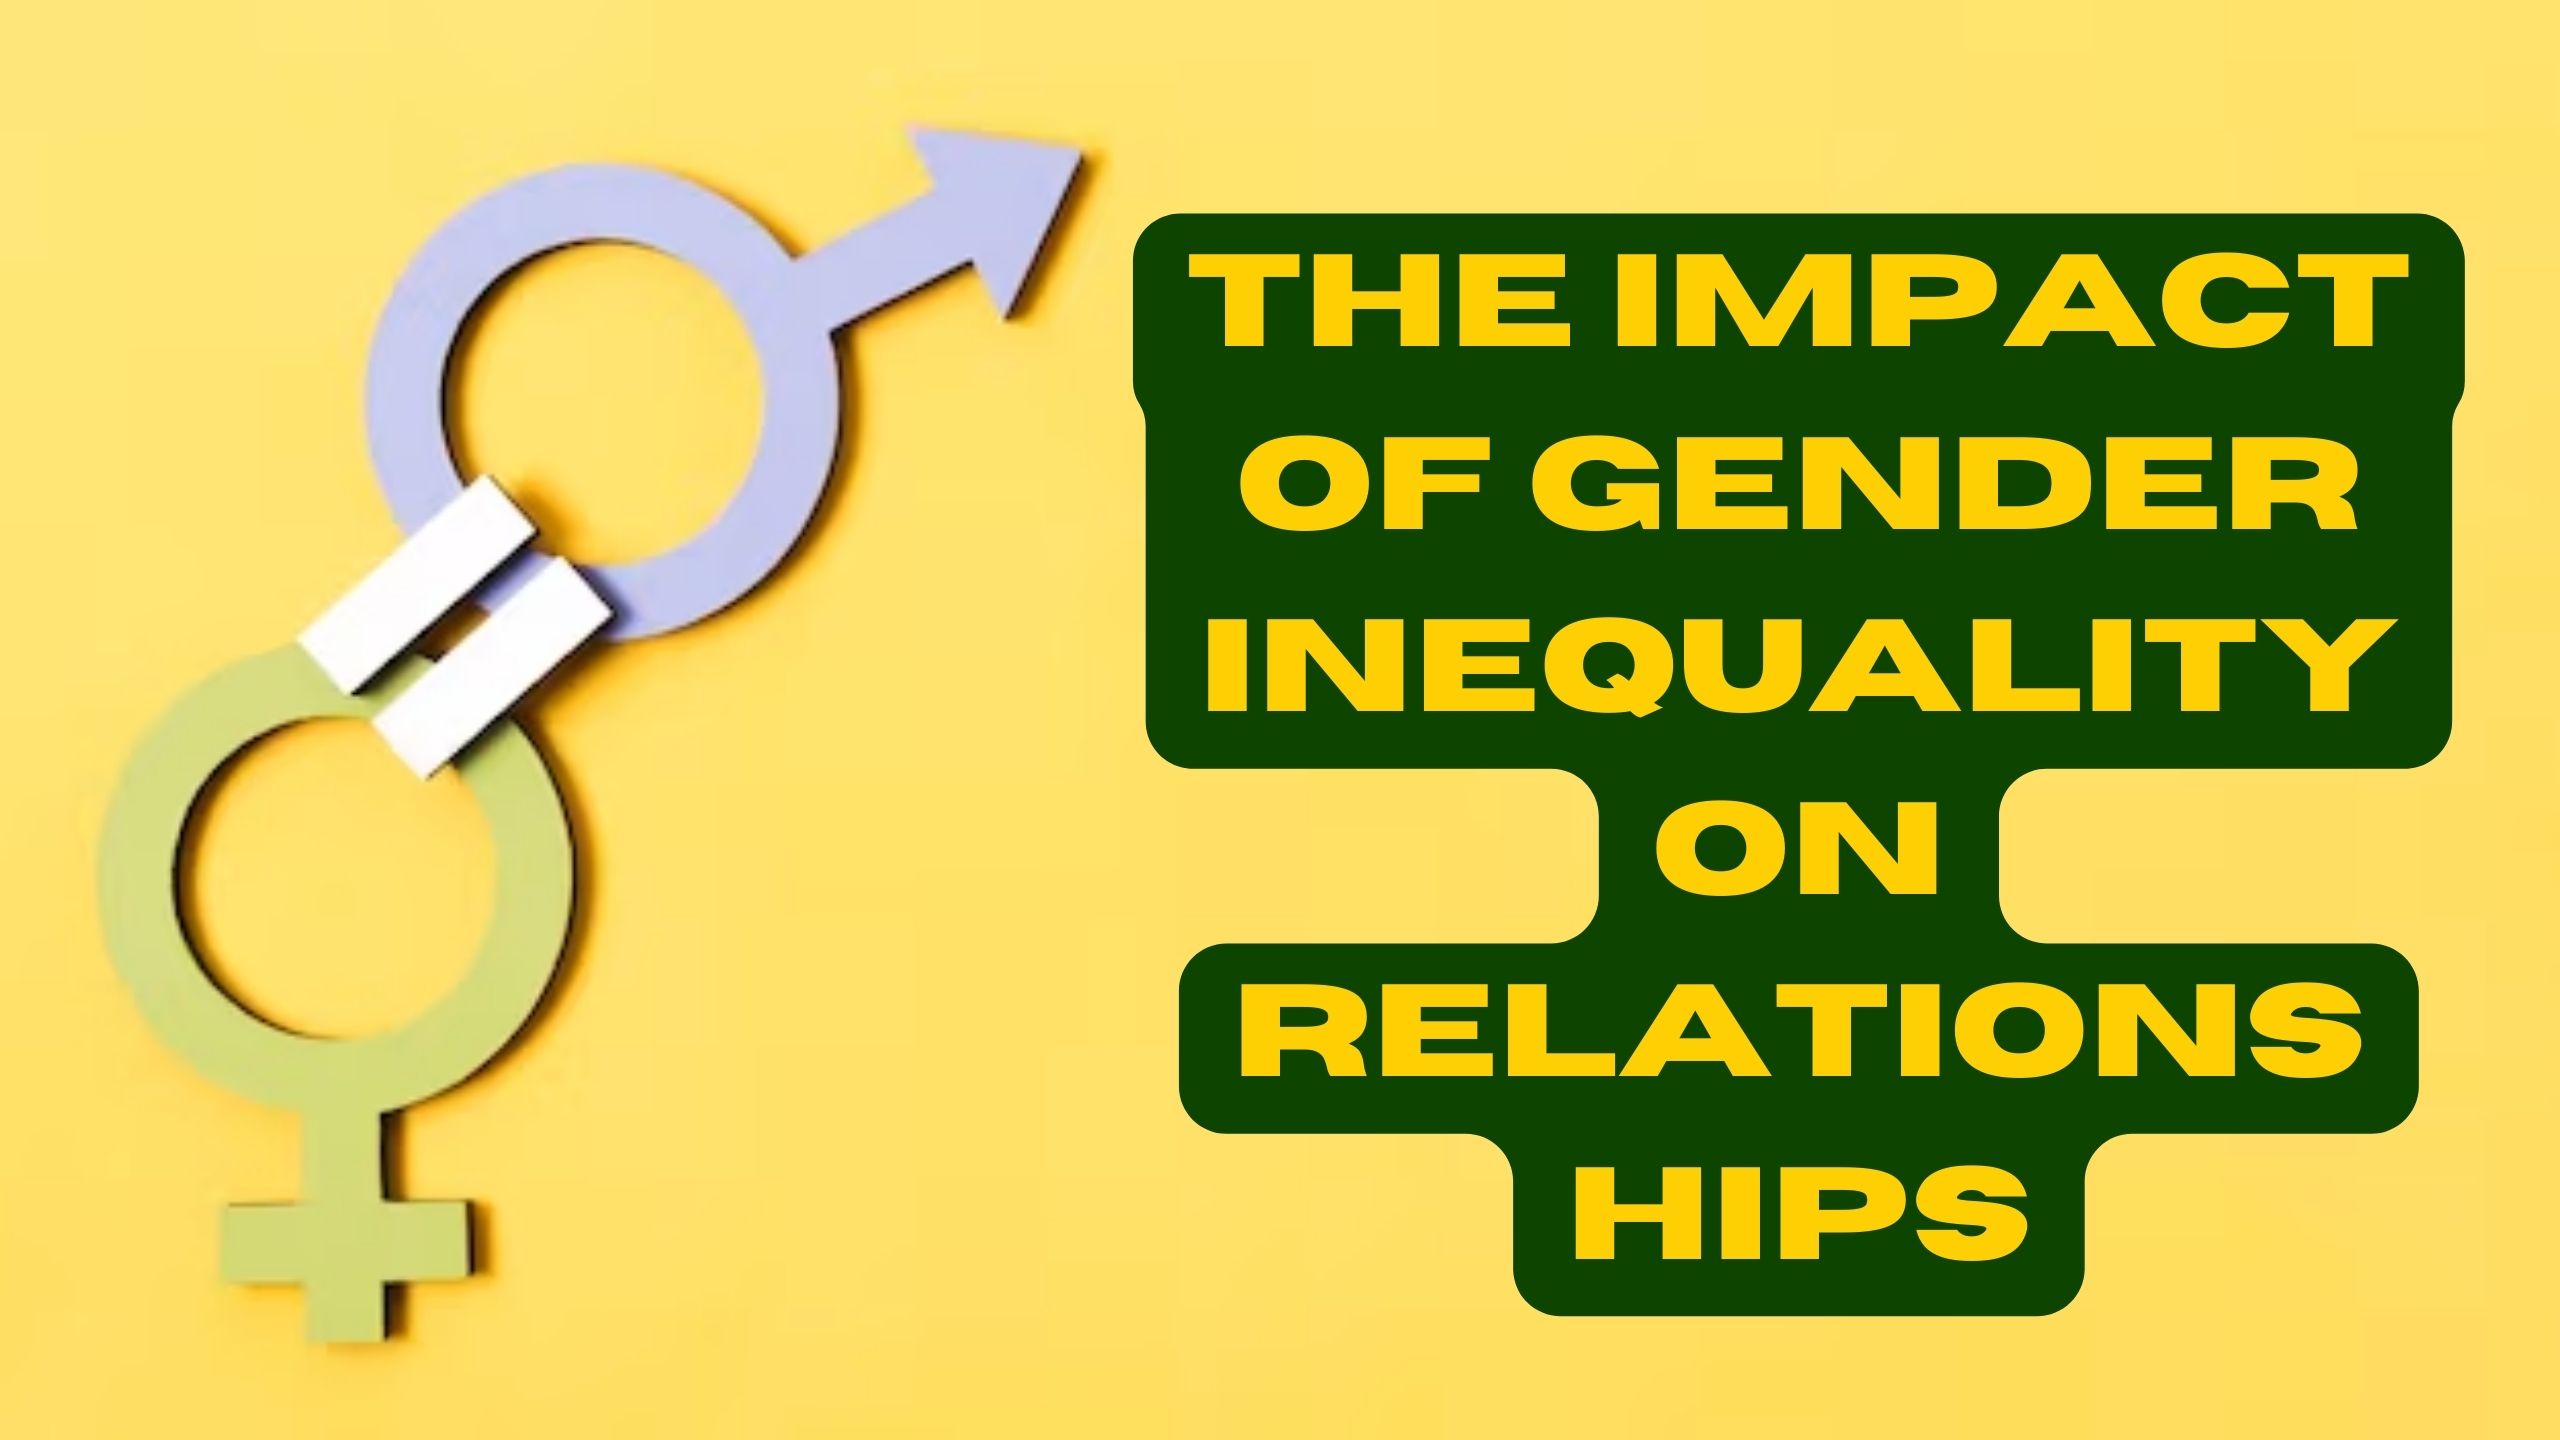 The Impact of Gender Inequality on Relationships